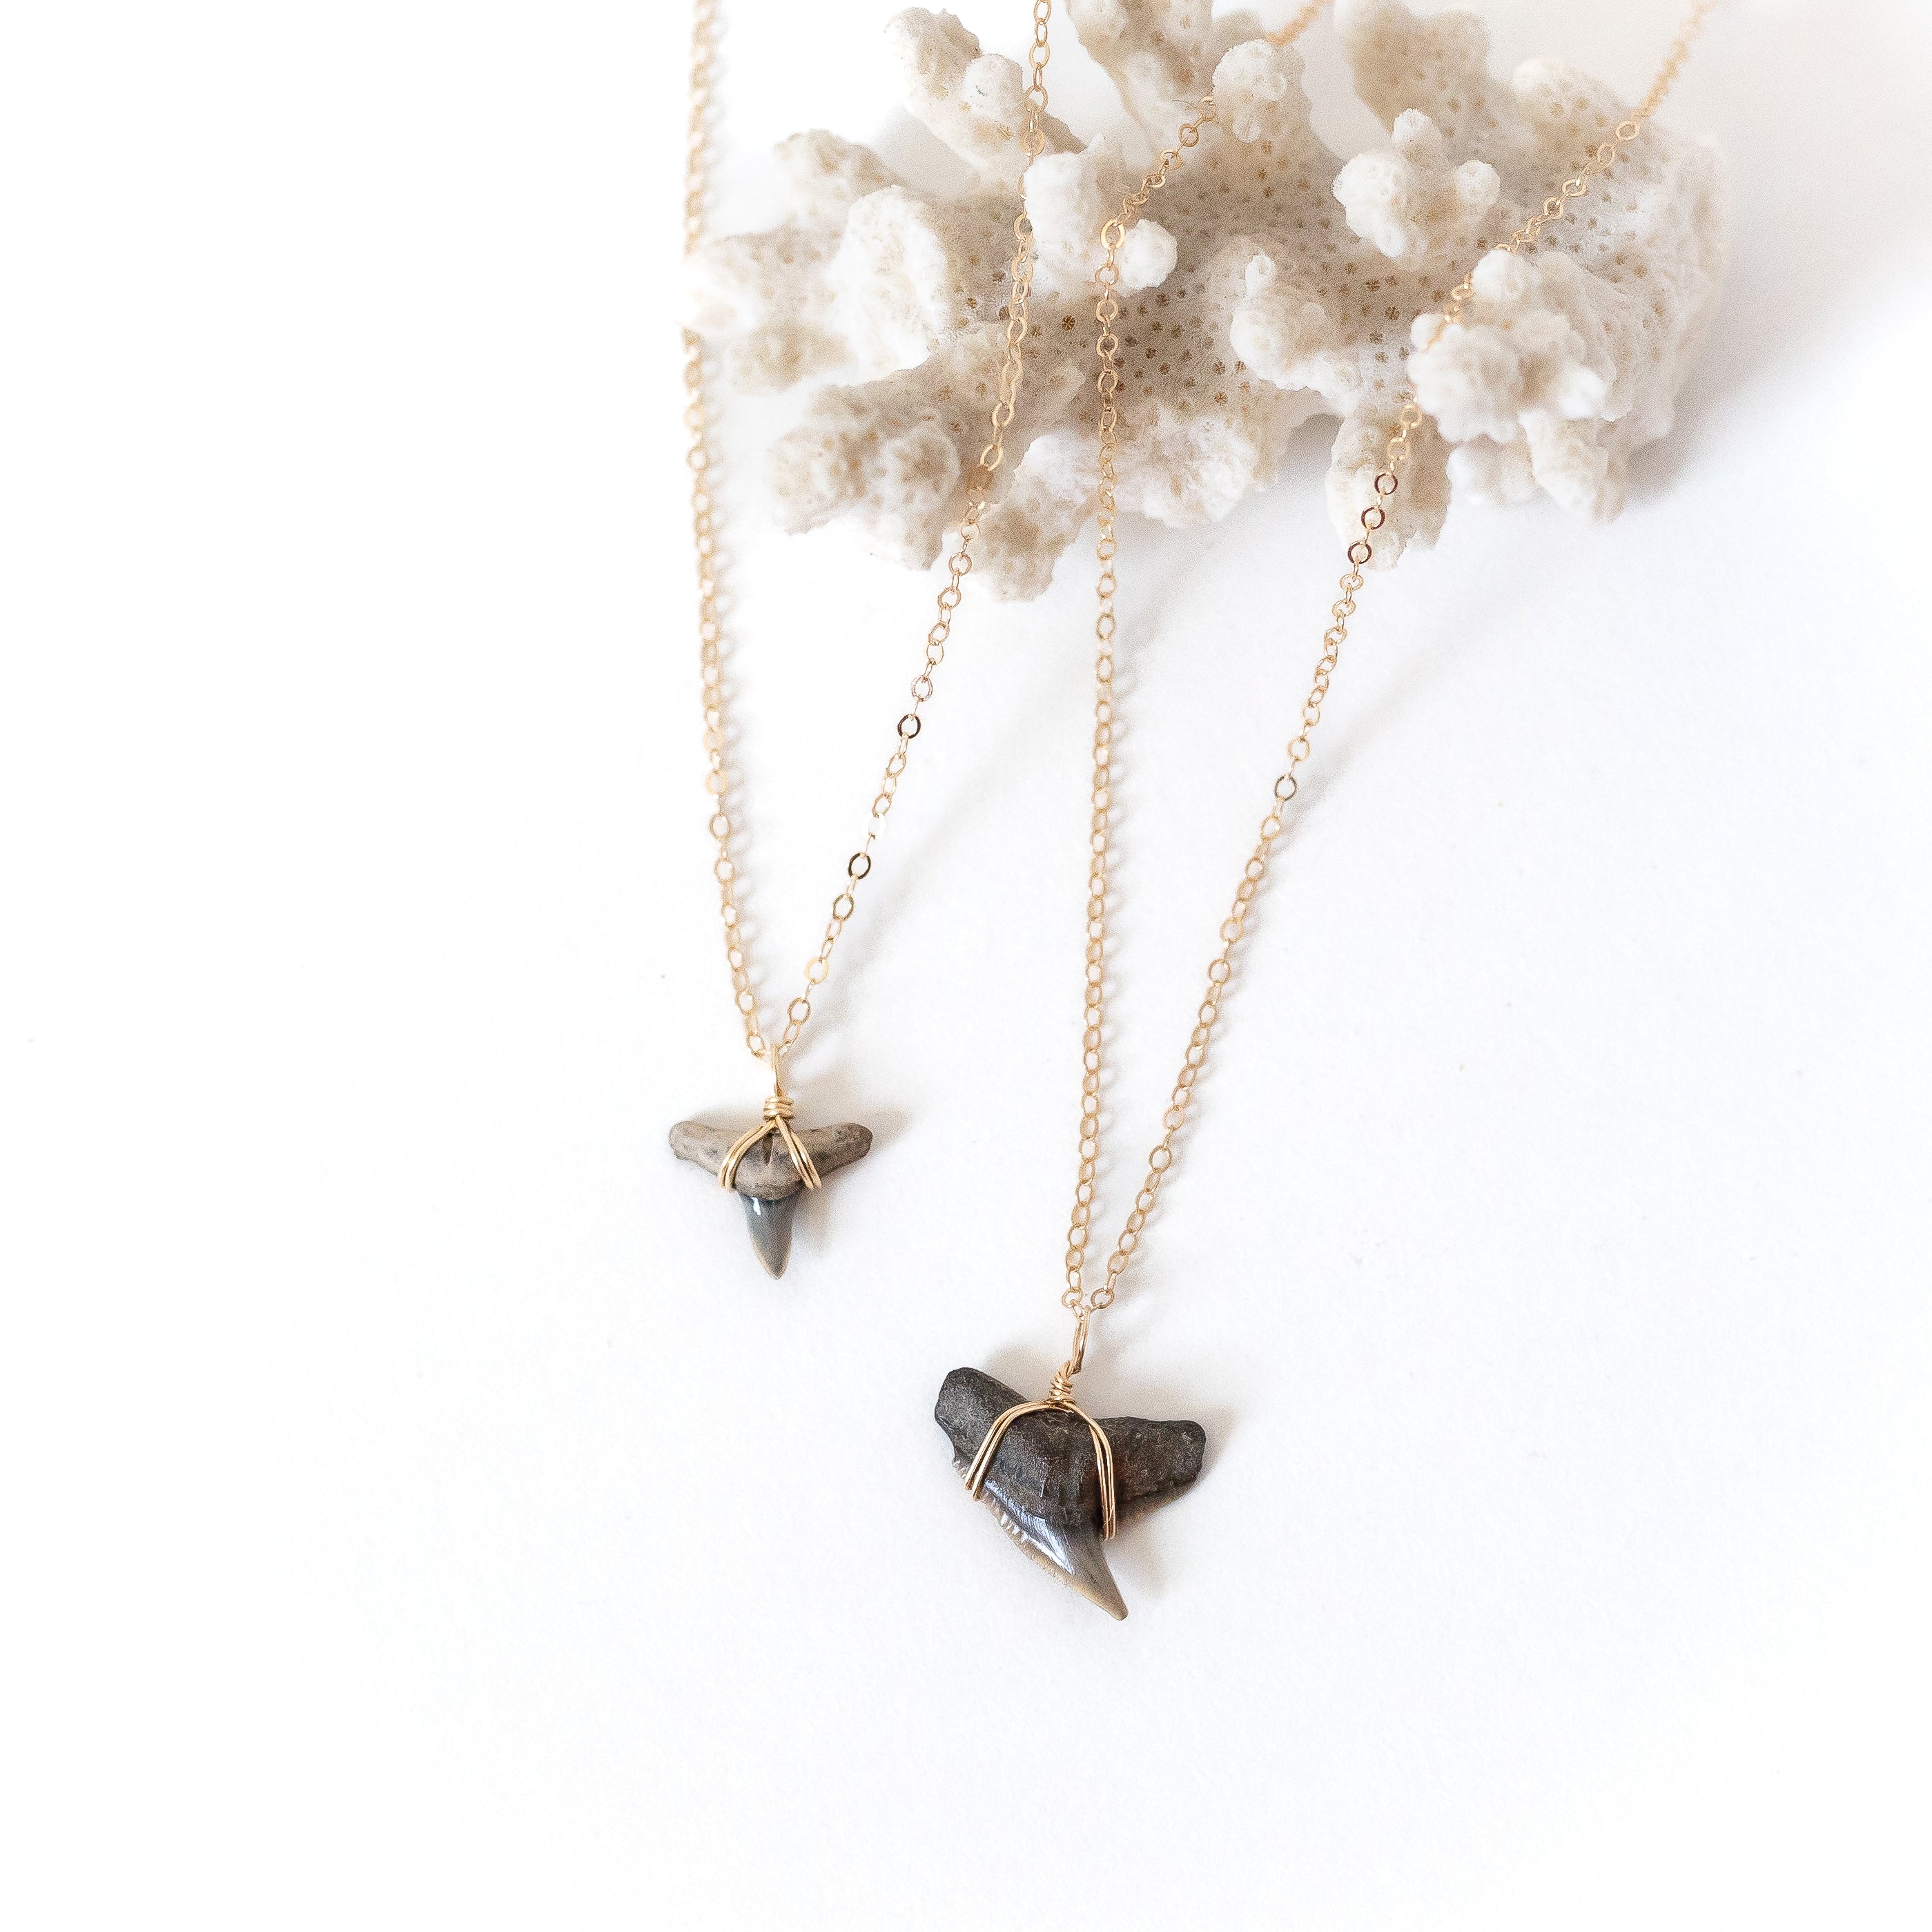 Two small shark tooth necklaces, both wrapped with gold wire attached to gold chain